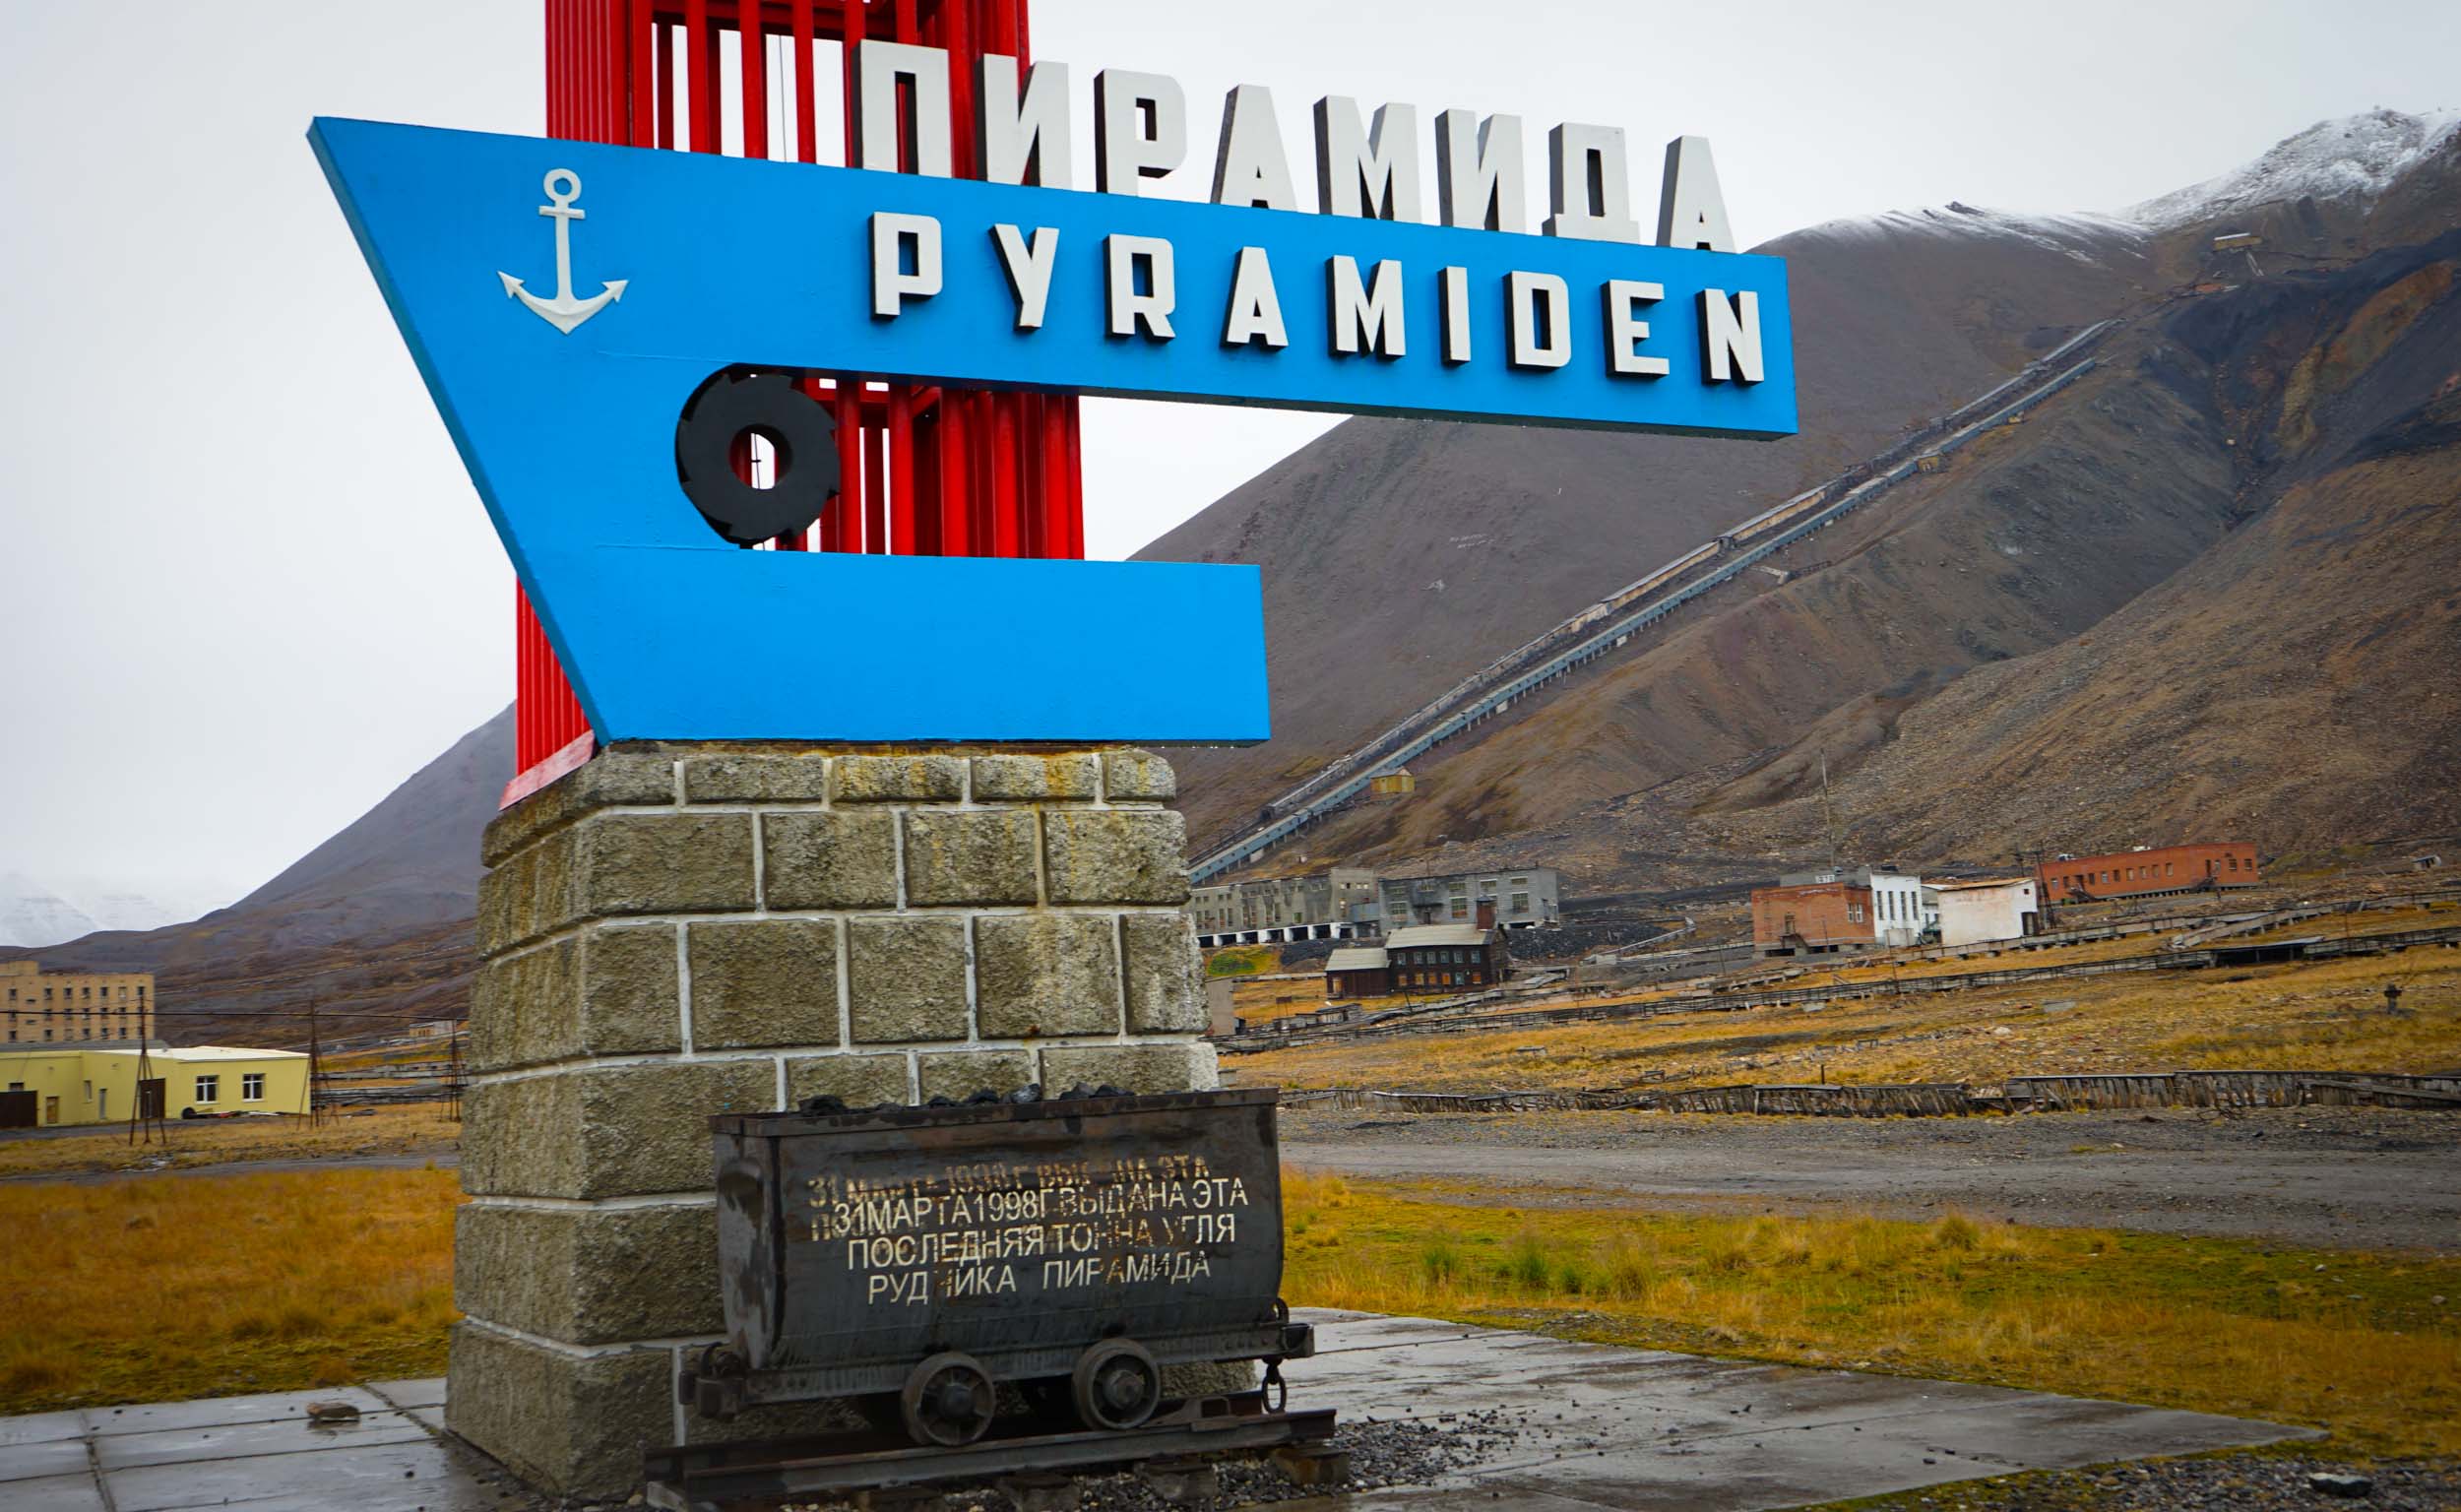 Pyramiden A Soviet Ghost Town In Arctic Norway — Jonaa Journal Of The North Atlantic And Arctic 